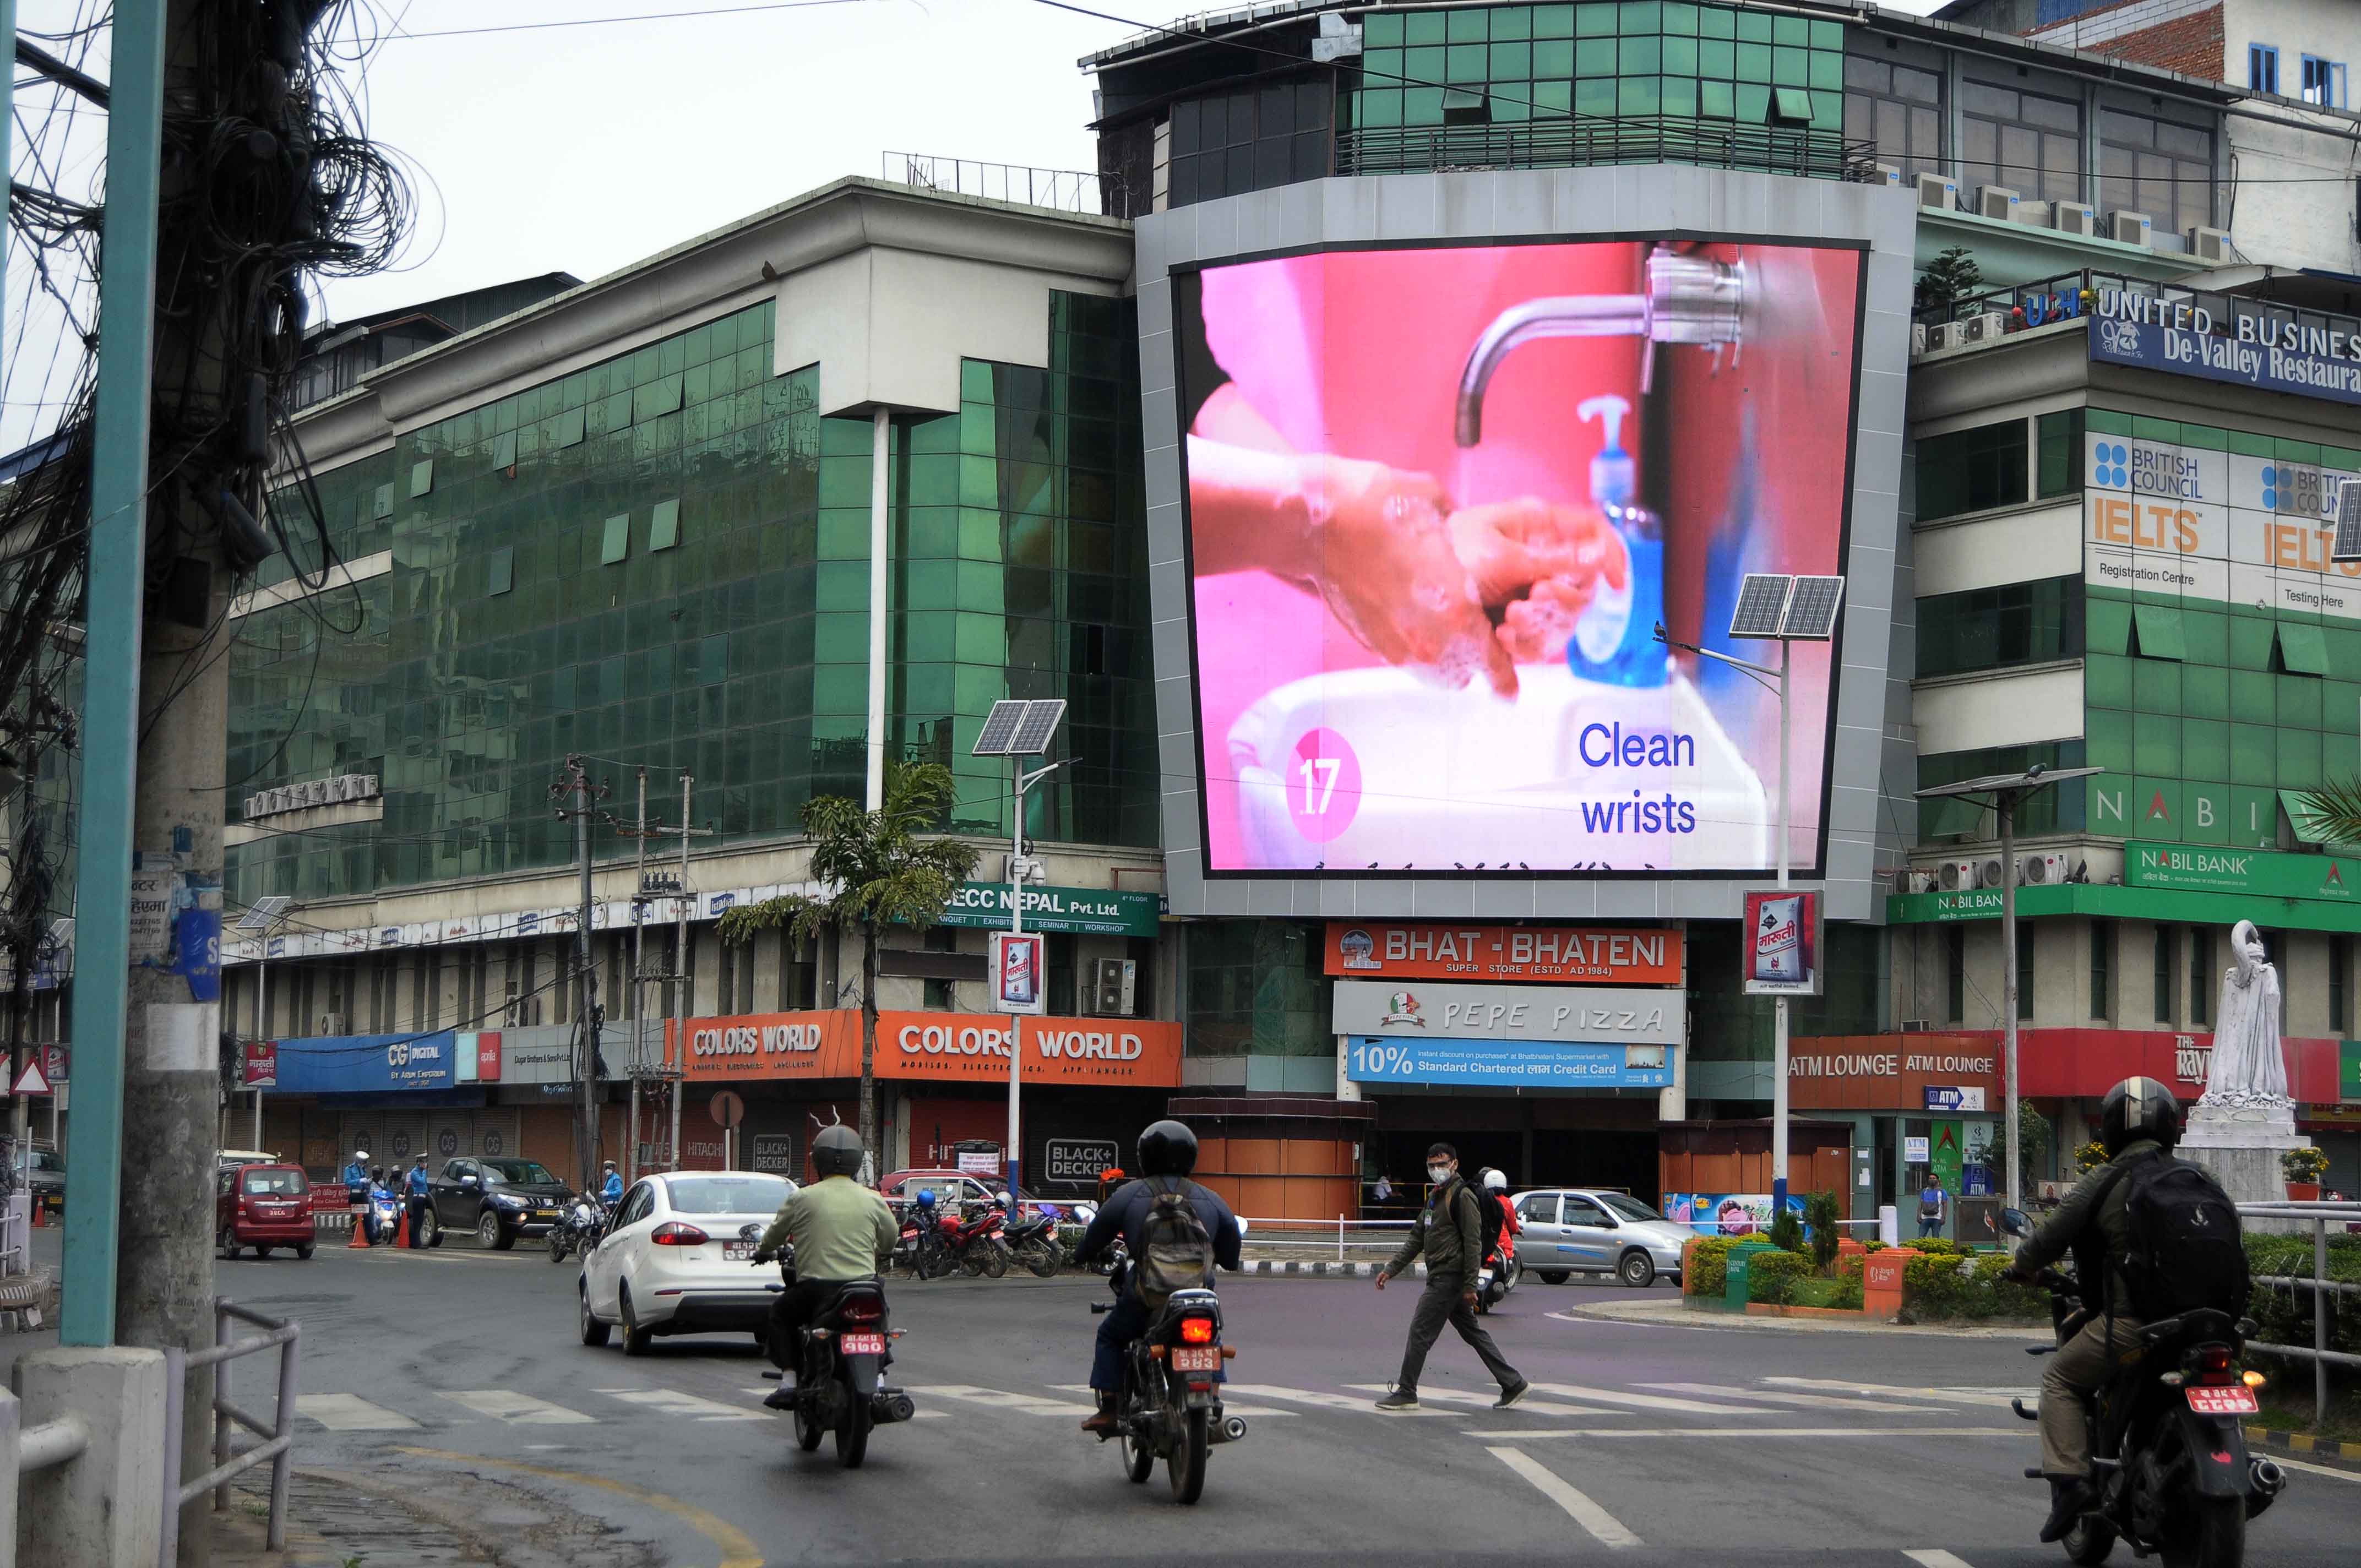 A TV showing awareness of procedures for sanitizing hands in the fight against COVID-19 to be watched by a passerby in Tripureshwor, Kathmandu, on Tuesday. PHOTO: BALKRISHNA THAPA CHHETRI